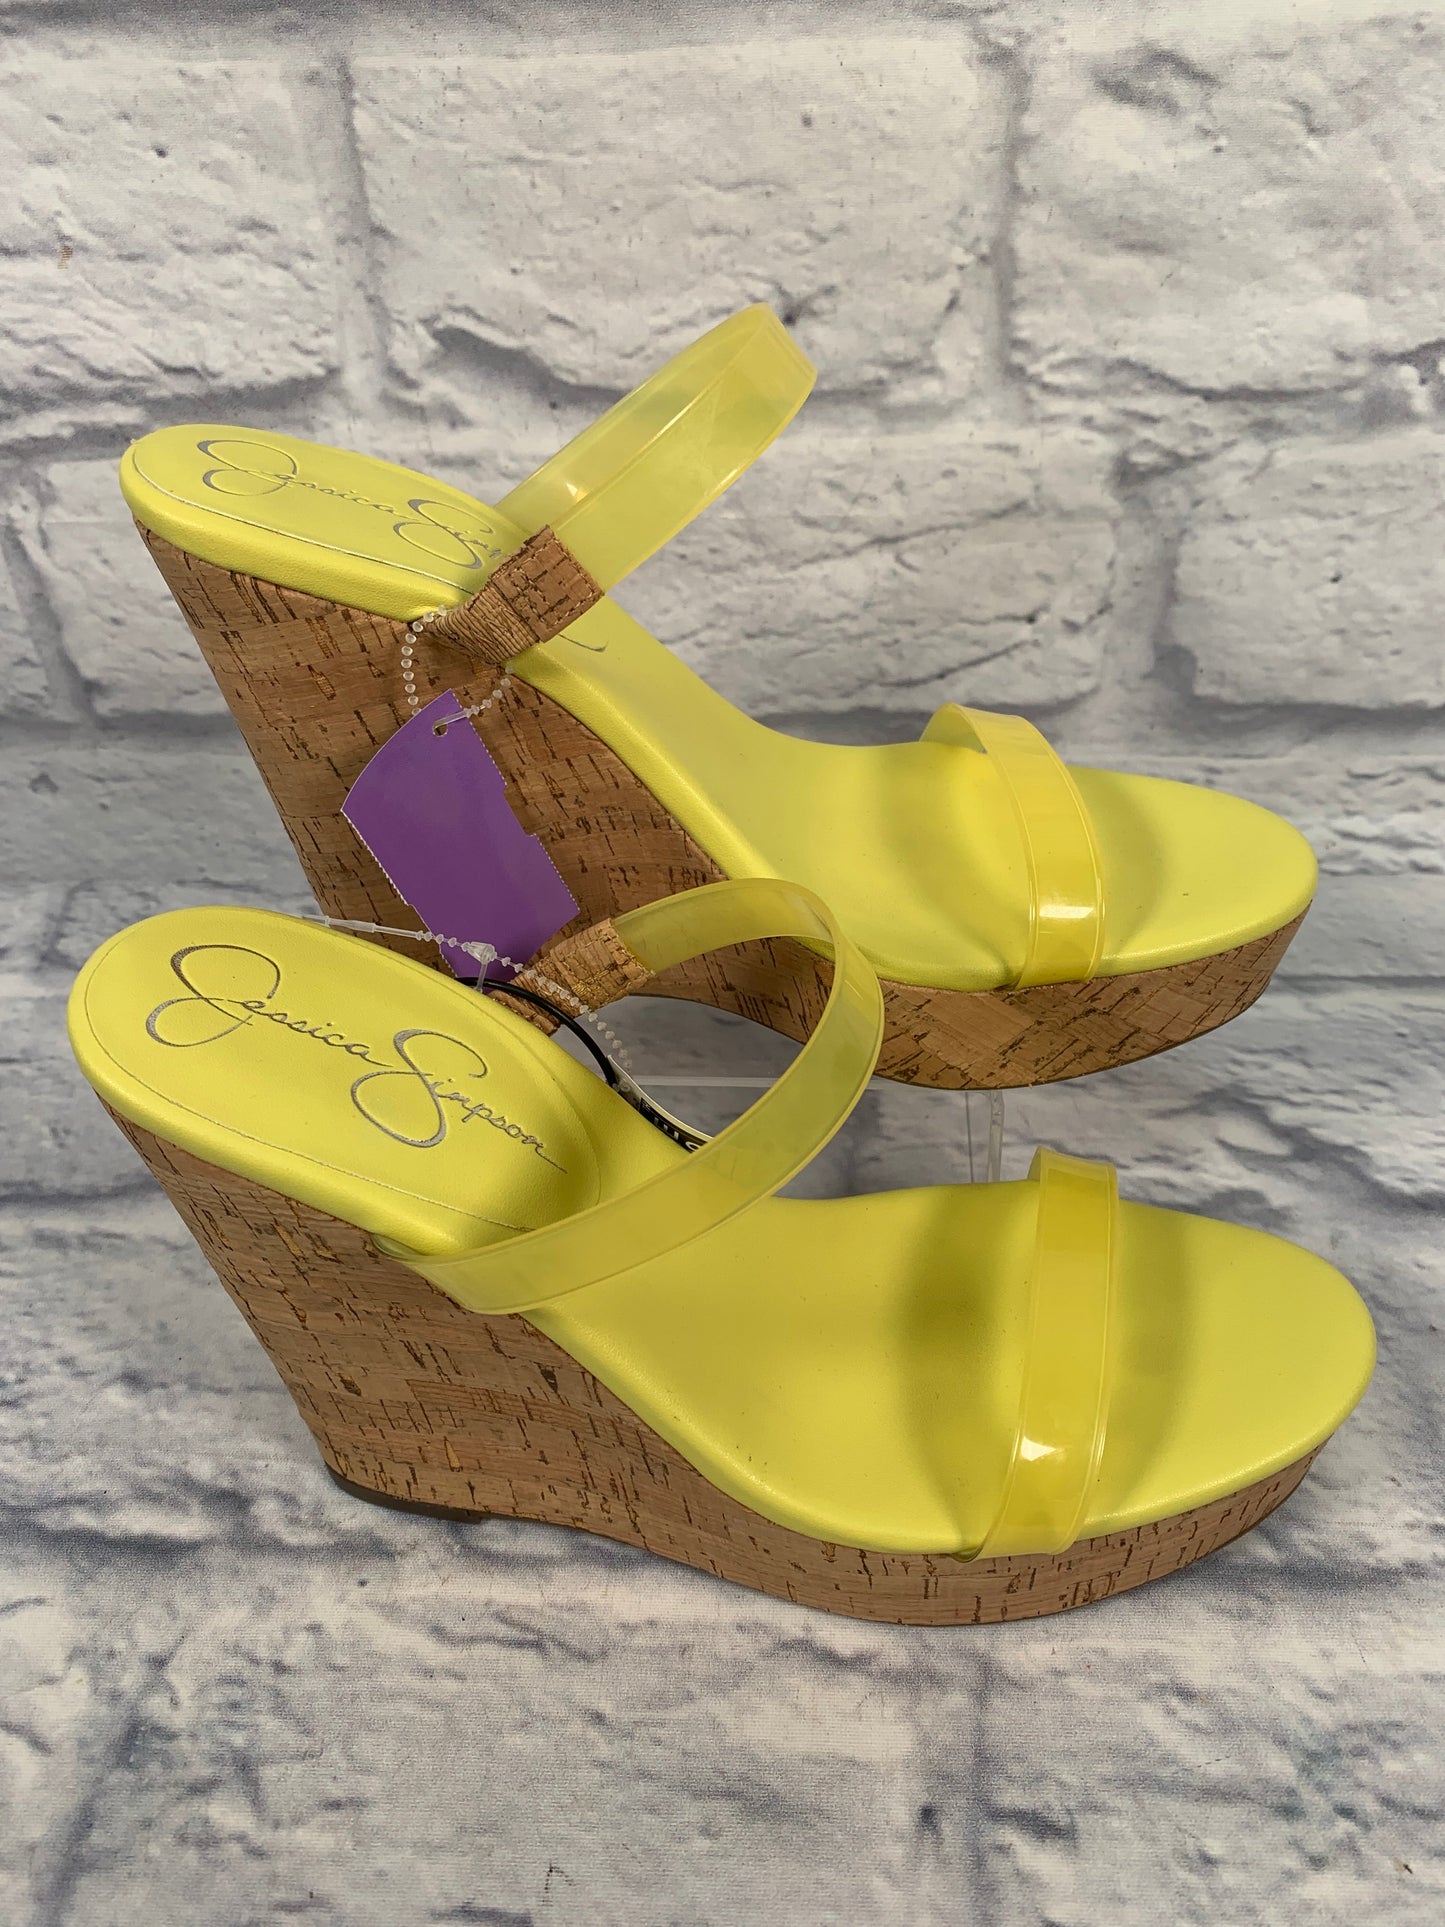 Sandals Heels Wedge By Jessica Simpson  Size: 8